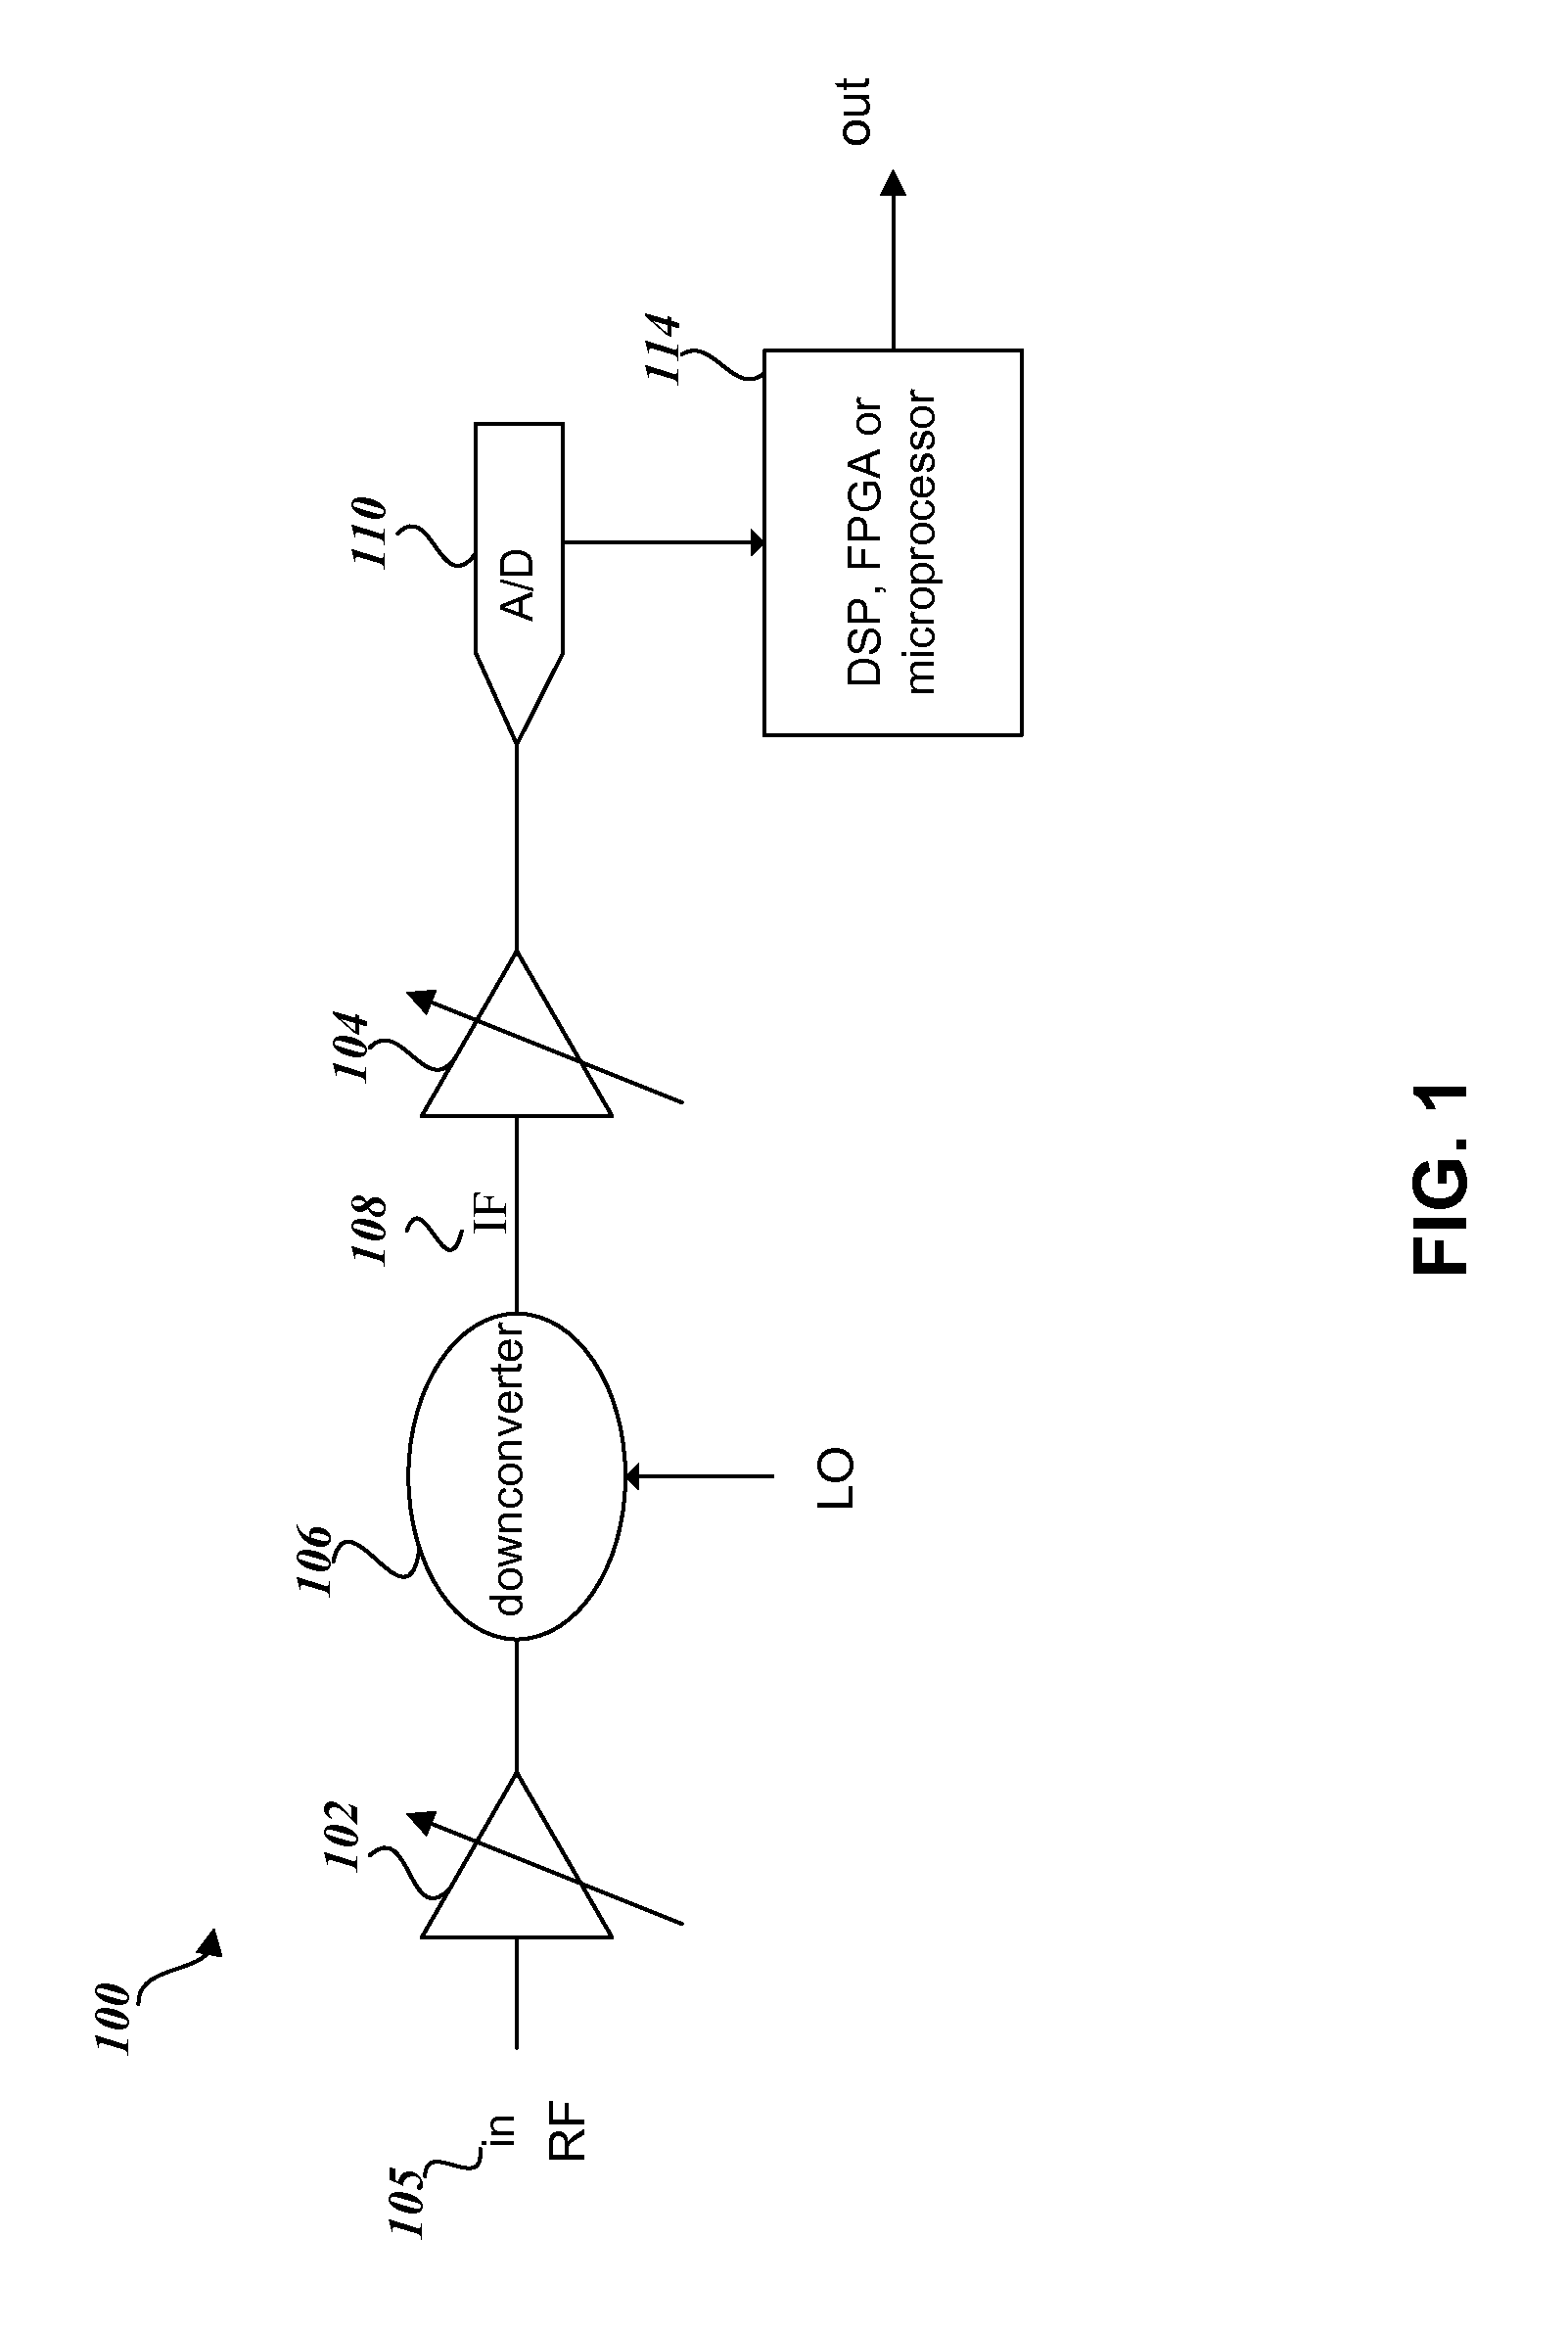 Variable gain control for high speed receivers